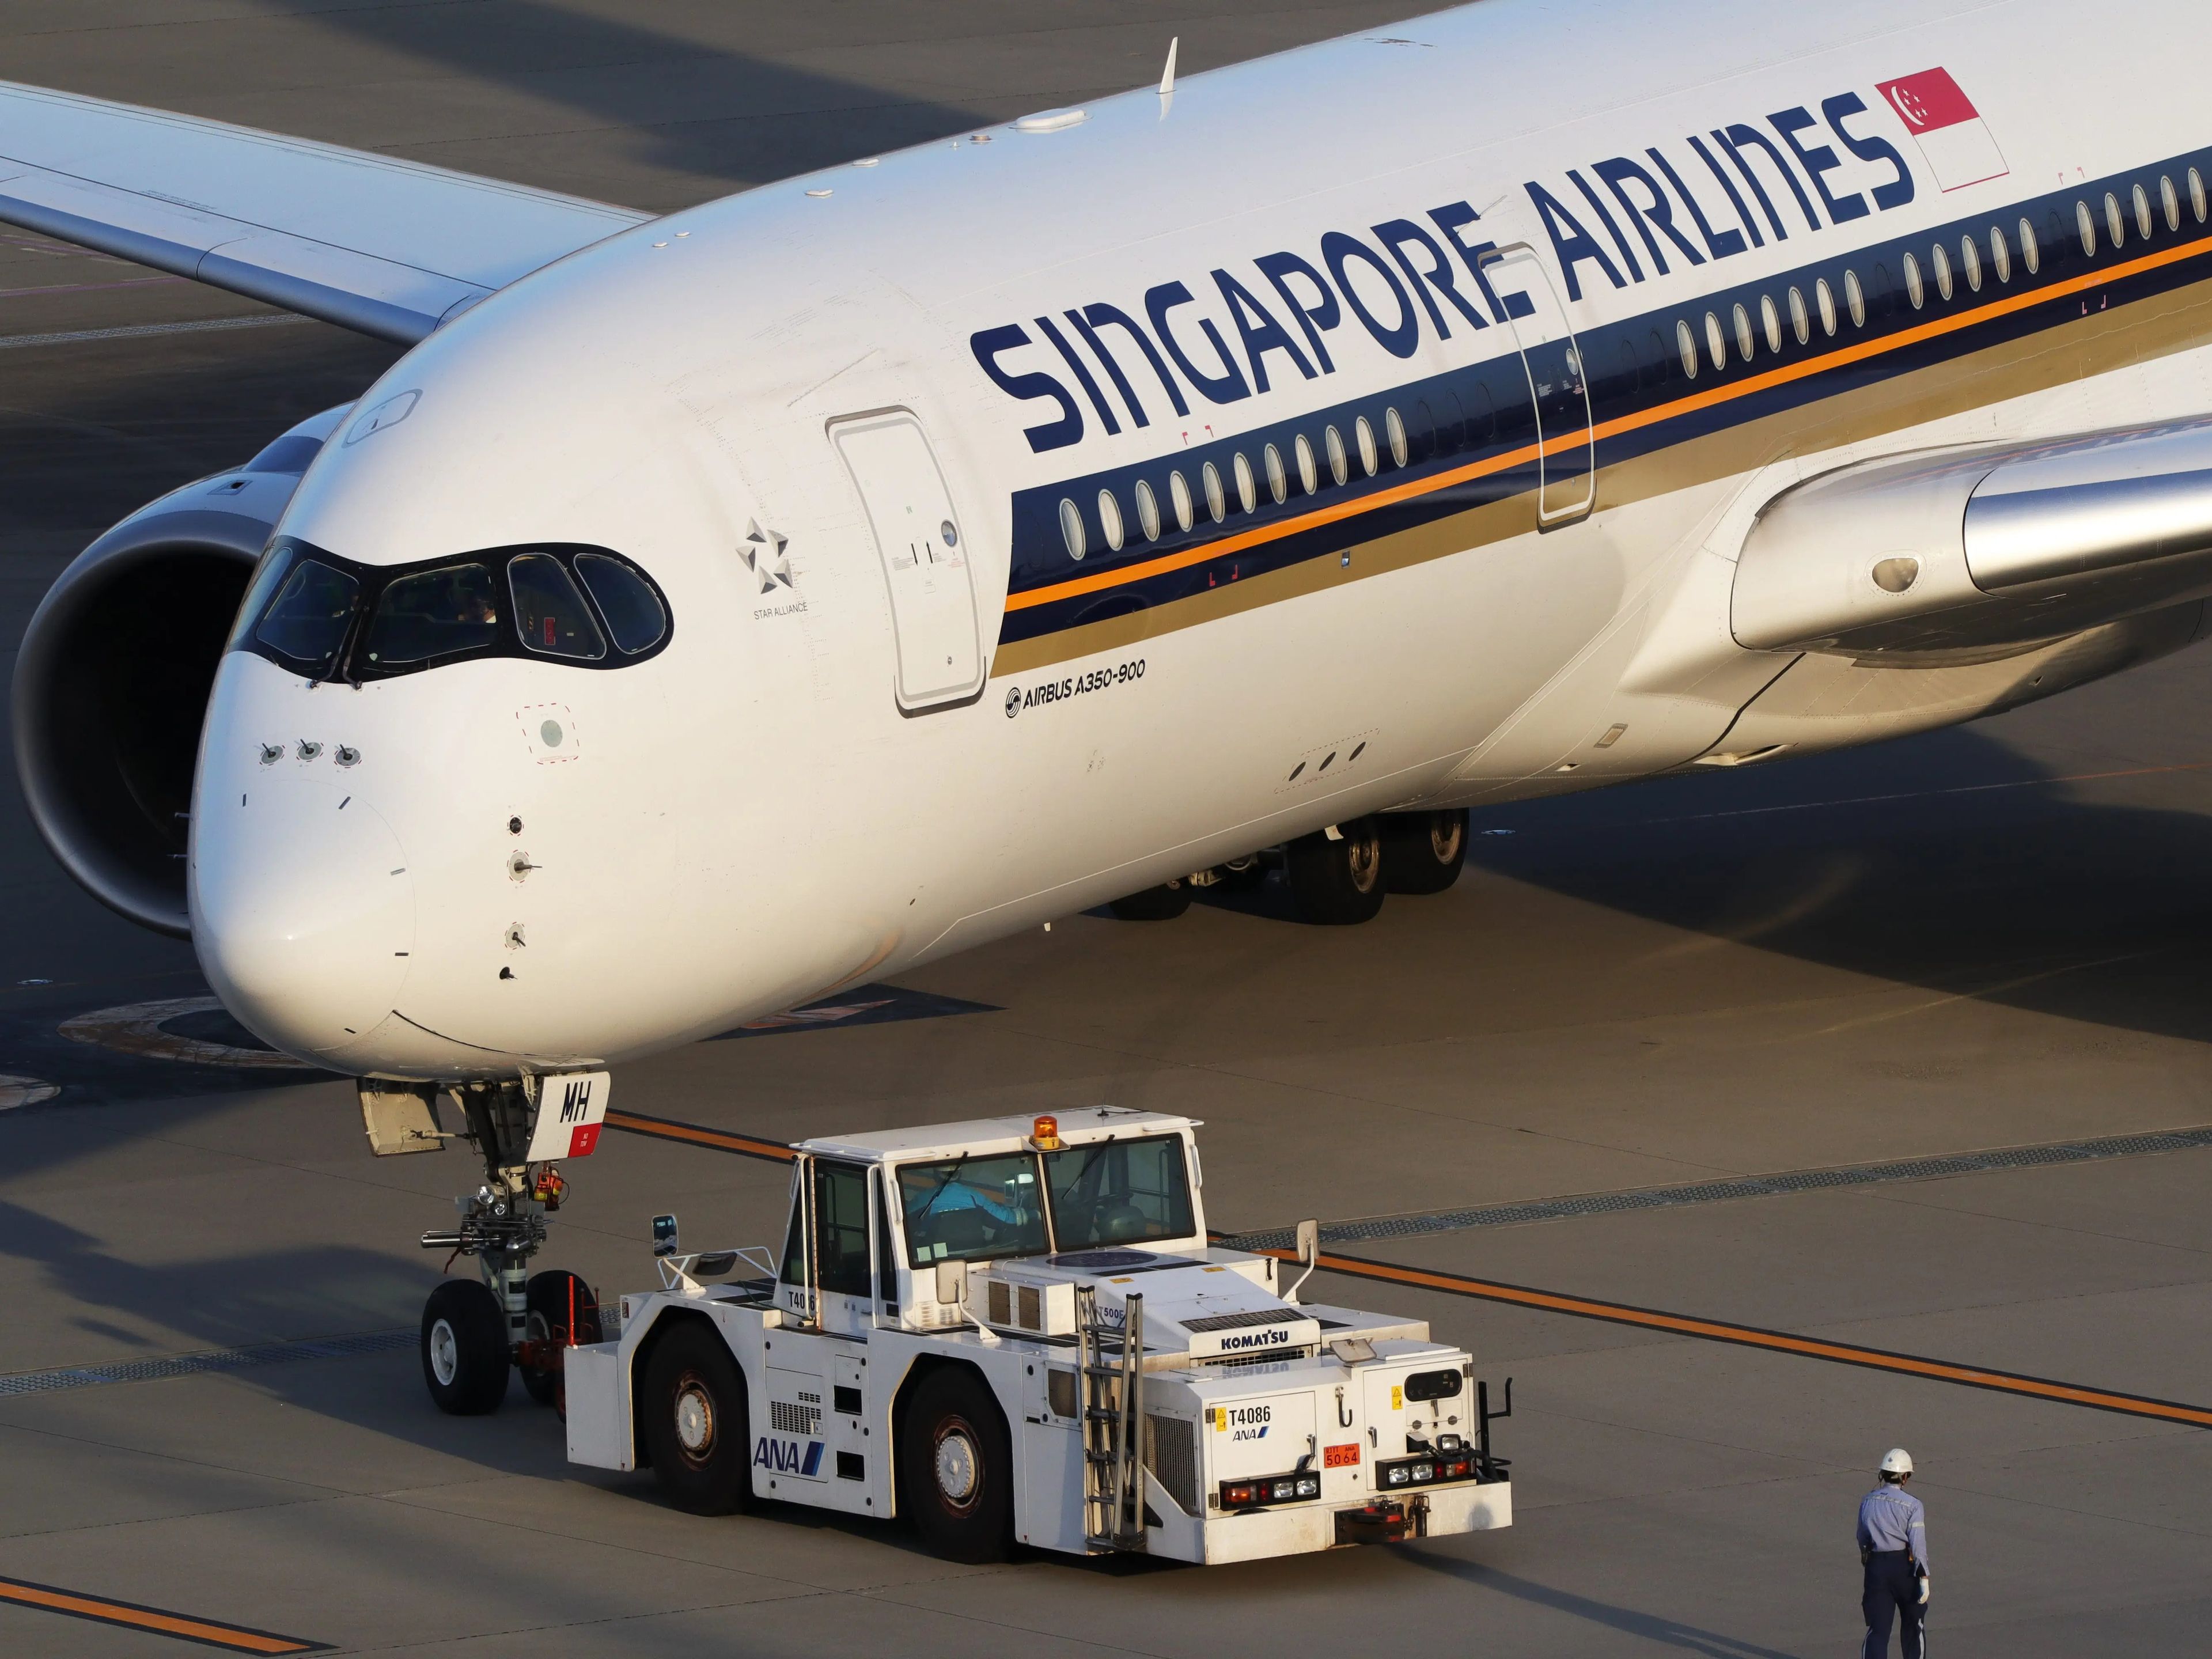 Singapore Airlines A350-900.